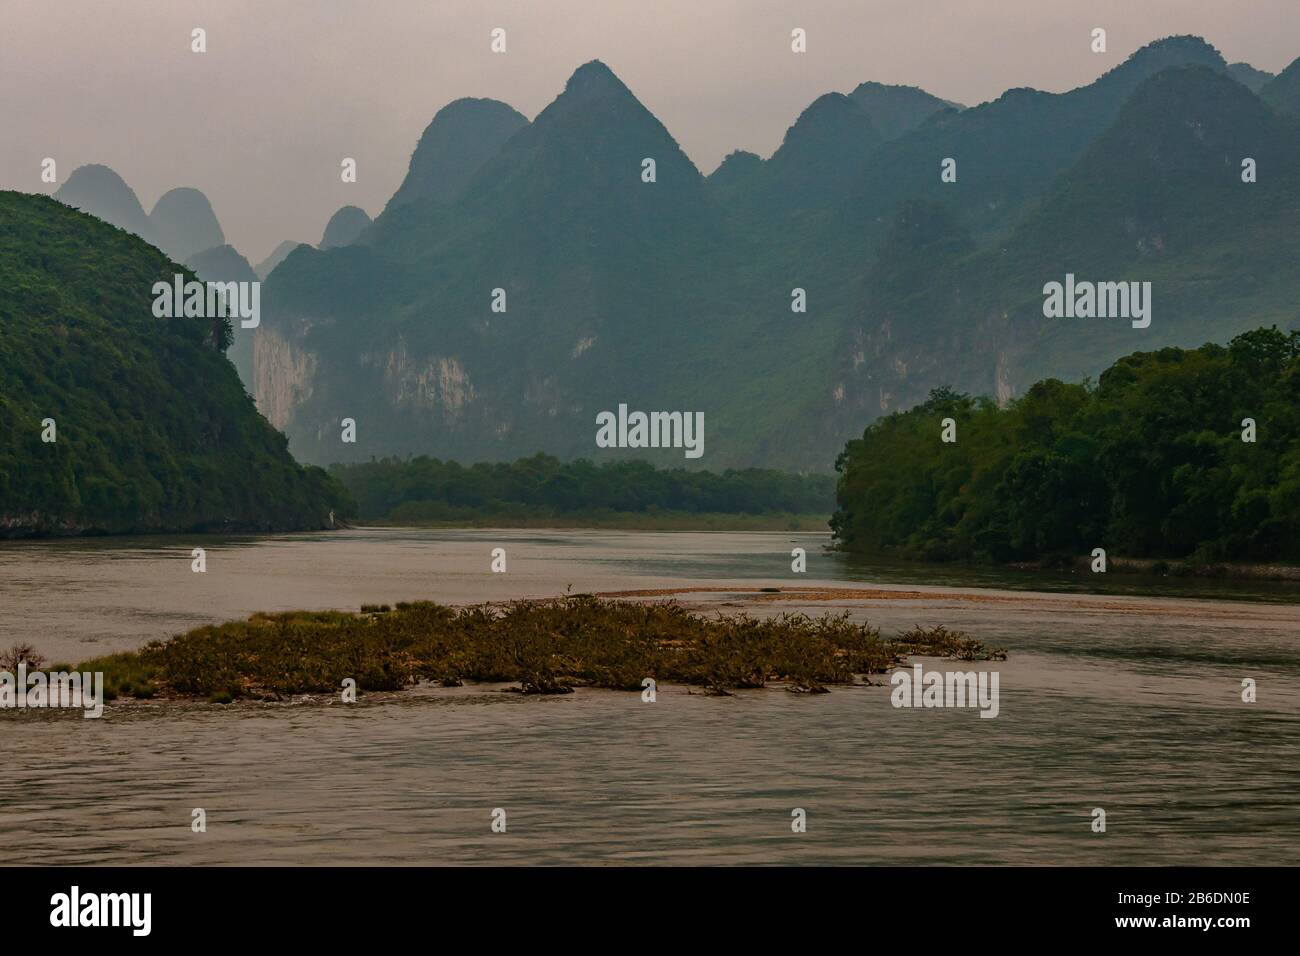 Guilin, China - May 10, 2010: Along Li River. Landscape with green forested karst mountain and cliffs under foggy sky. Brown water and marsh land up f Stock Photo